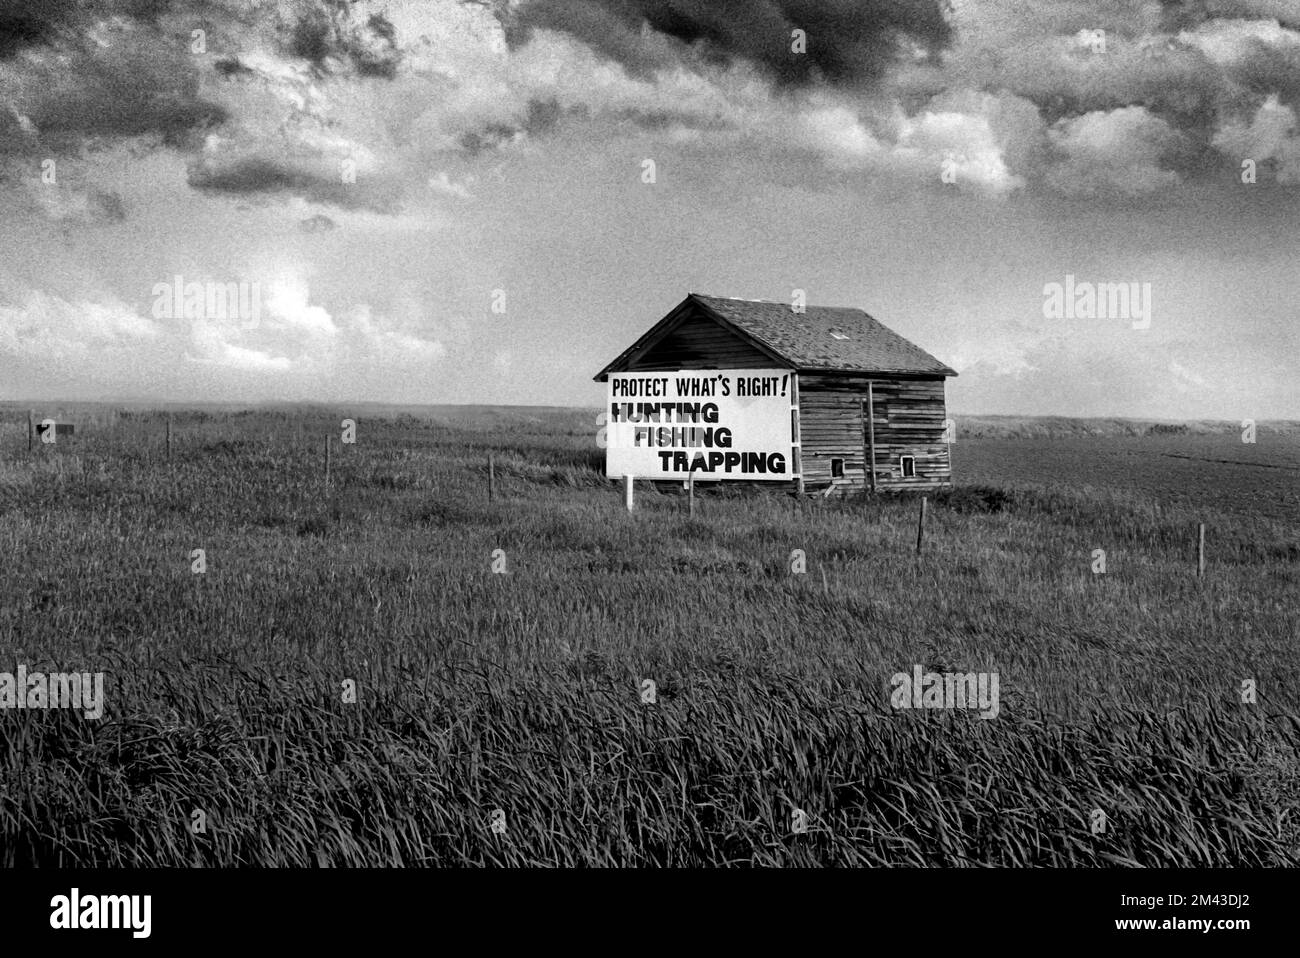 Landscape with stormy weather and a granary with a political sign advocating for hunters rights stating, “Protect What's Right, Hunting, Fishing, Tra Stock Photo